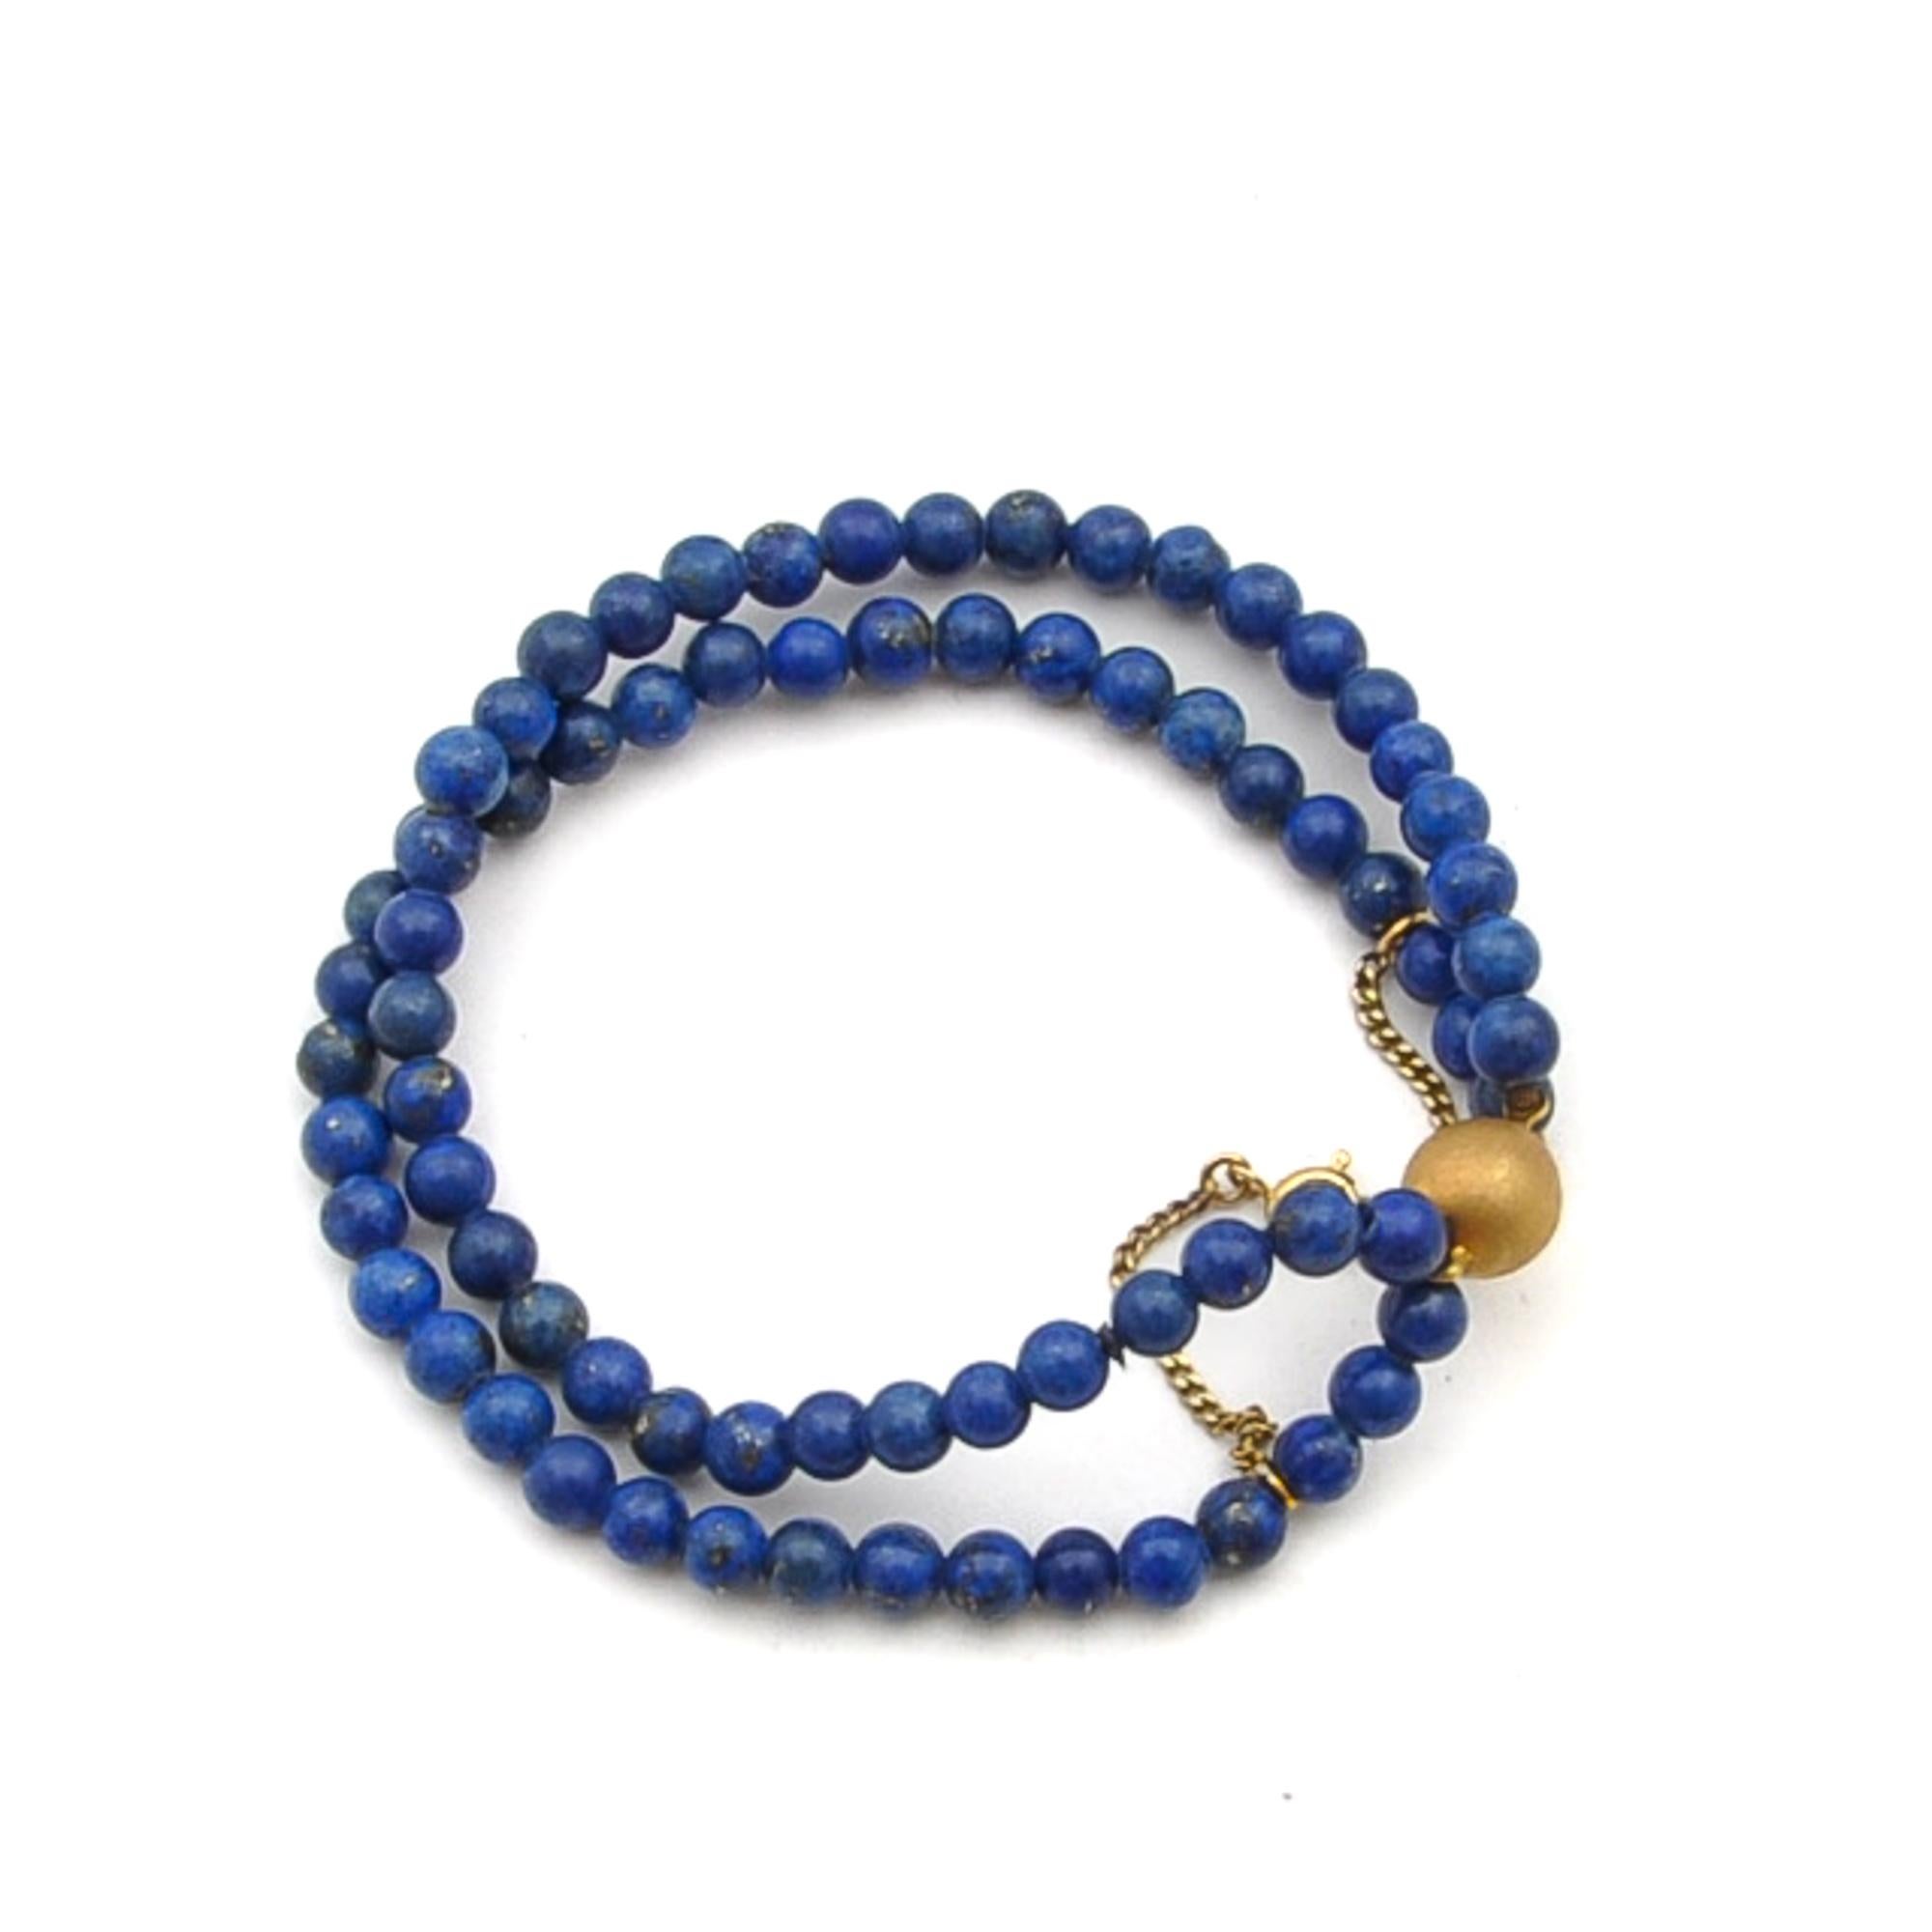 A Mid 20th Century lapis lazuli two-strand beaded bracelet set with a gold ball clasp. The lapis lazuli is smoothly round polished and has a beautiful blue hue and in this royal blue color displaying shimmery spots of gold throughout. Between the